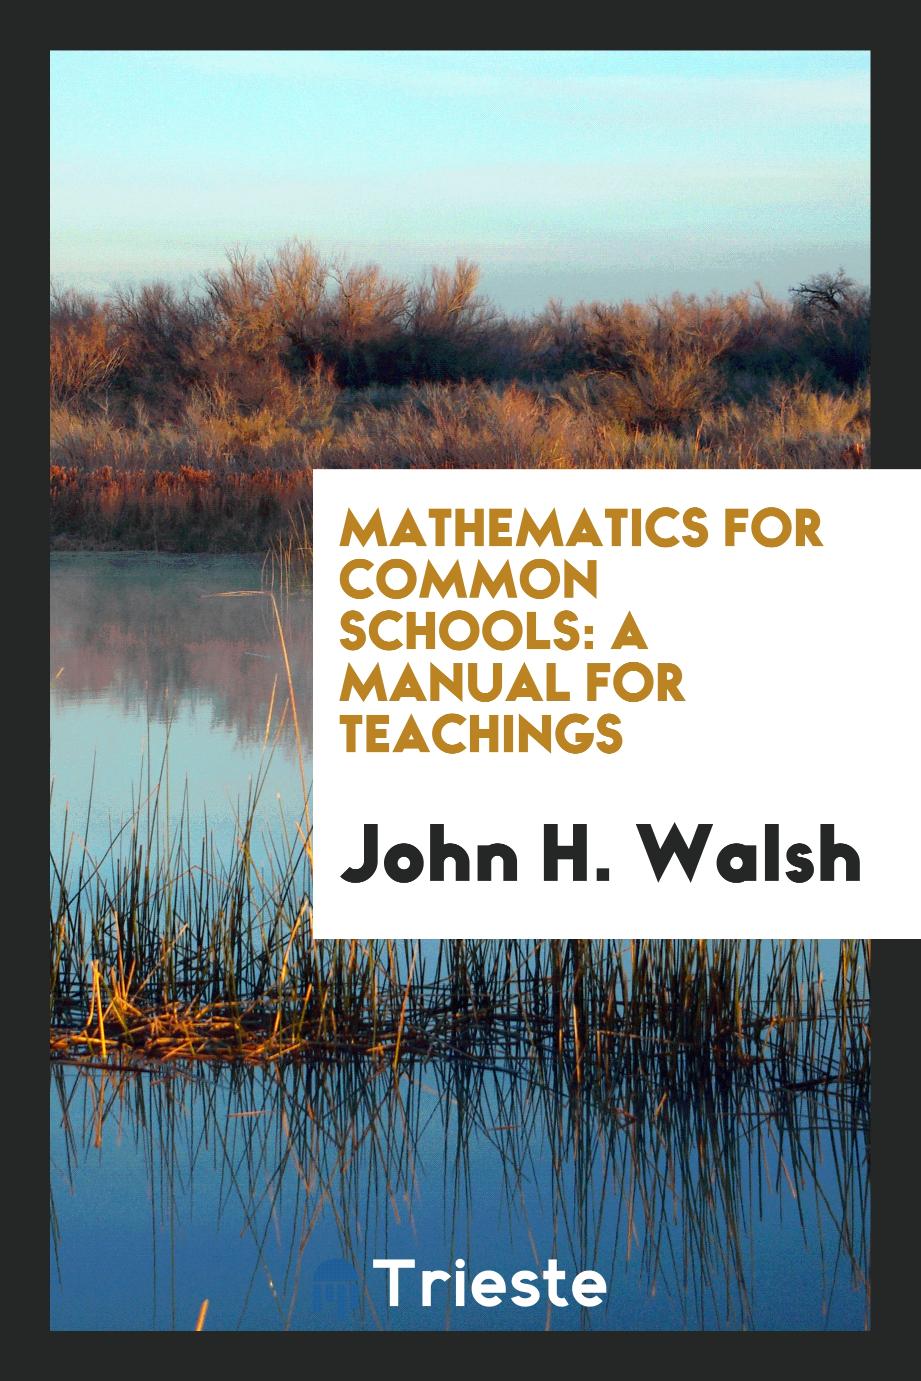 Mathematics for Common Schools: A Manual for Teachings